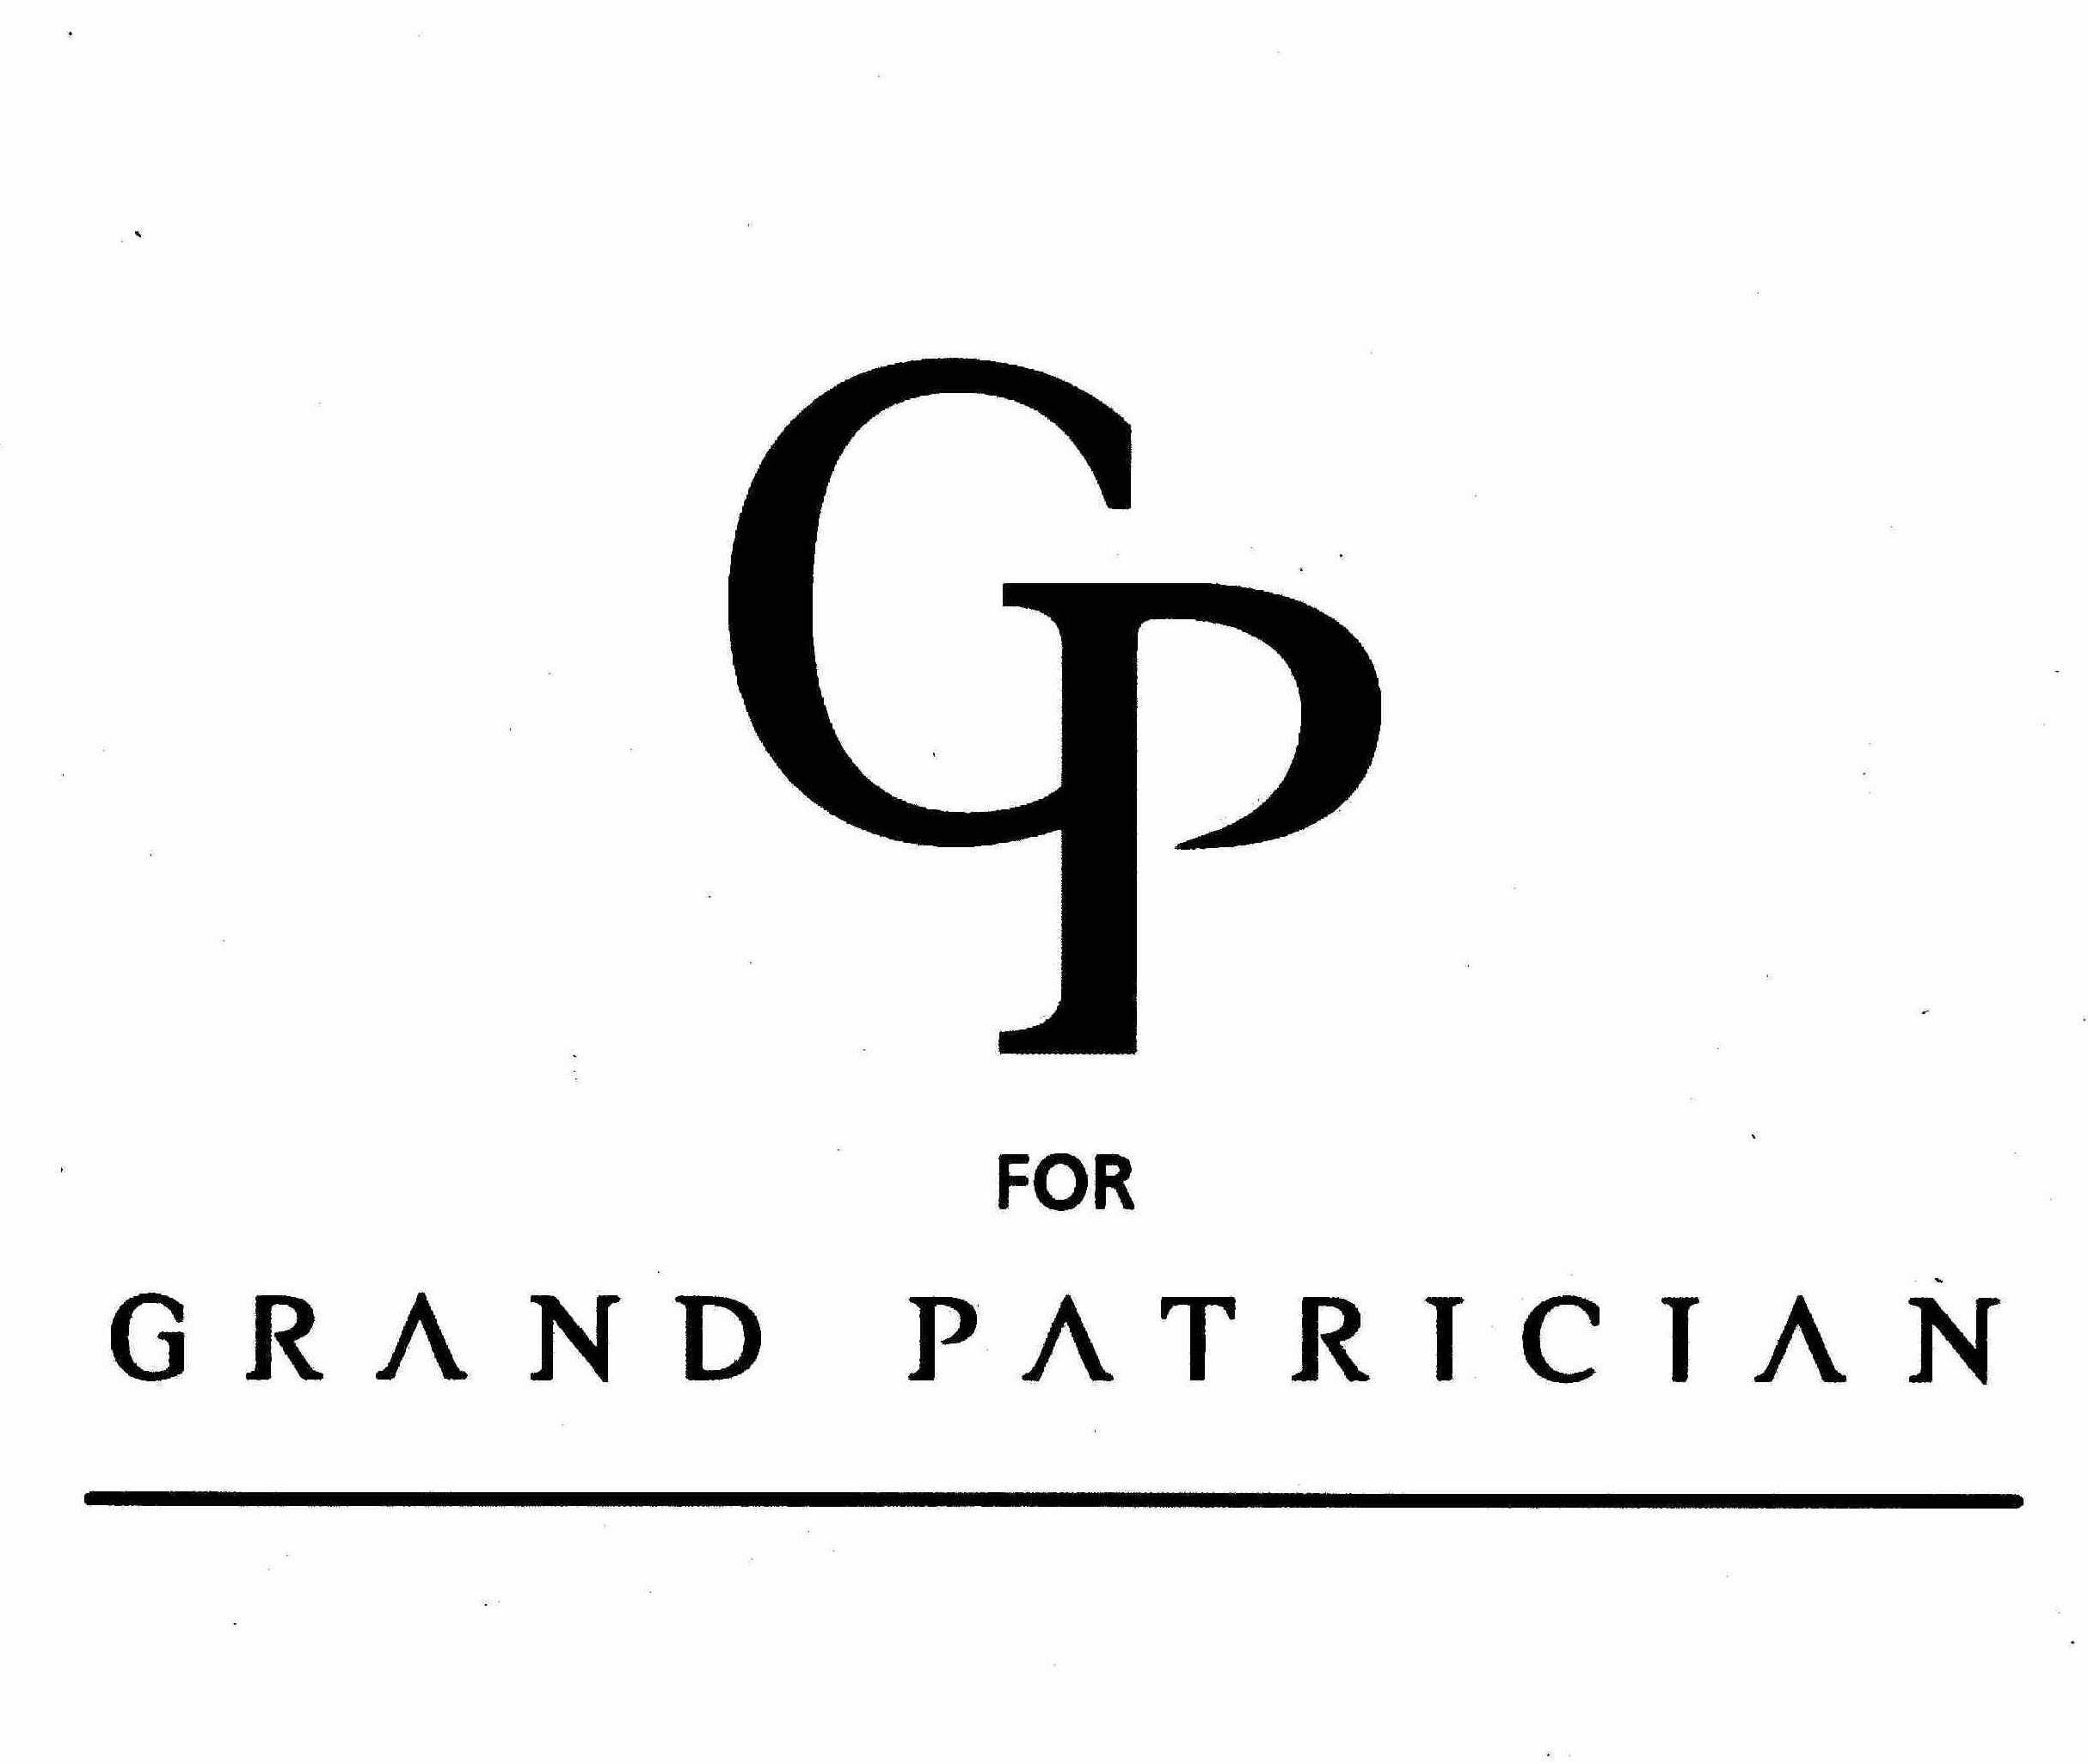  GP FOR GRAND PATRICIAN